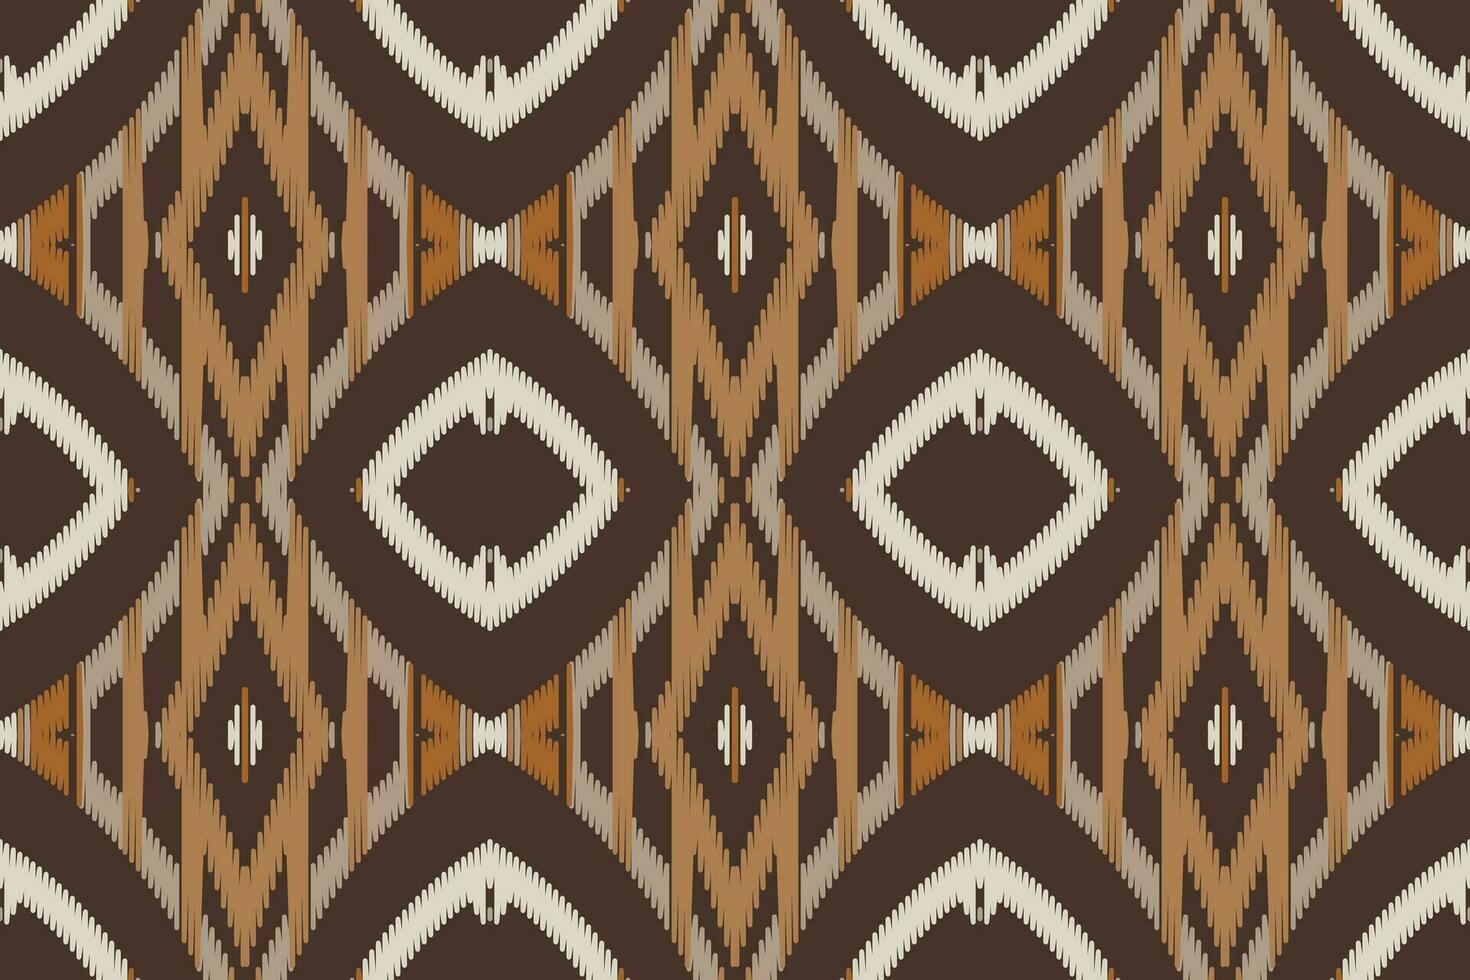 Motif Ikat Seamless Pattern Embroidery Background. Ikat Pattern Geometric Ethnic Oriental Pattern traditional.aztec Style Abstract Vector design for Texture,fabric,clothing,wrapping,sarong.